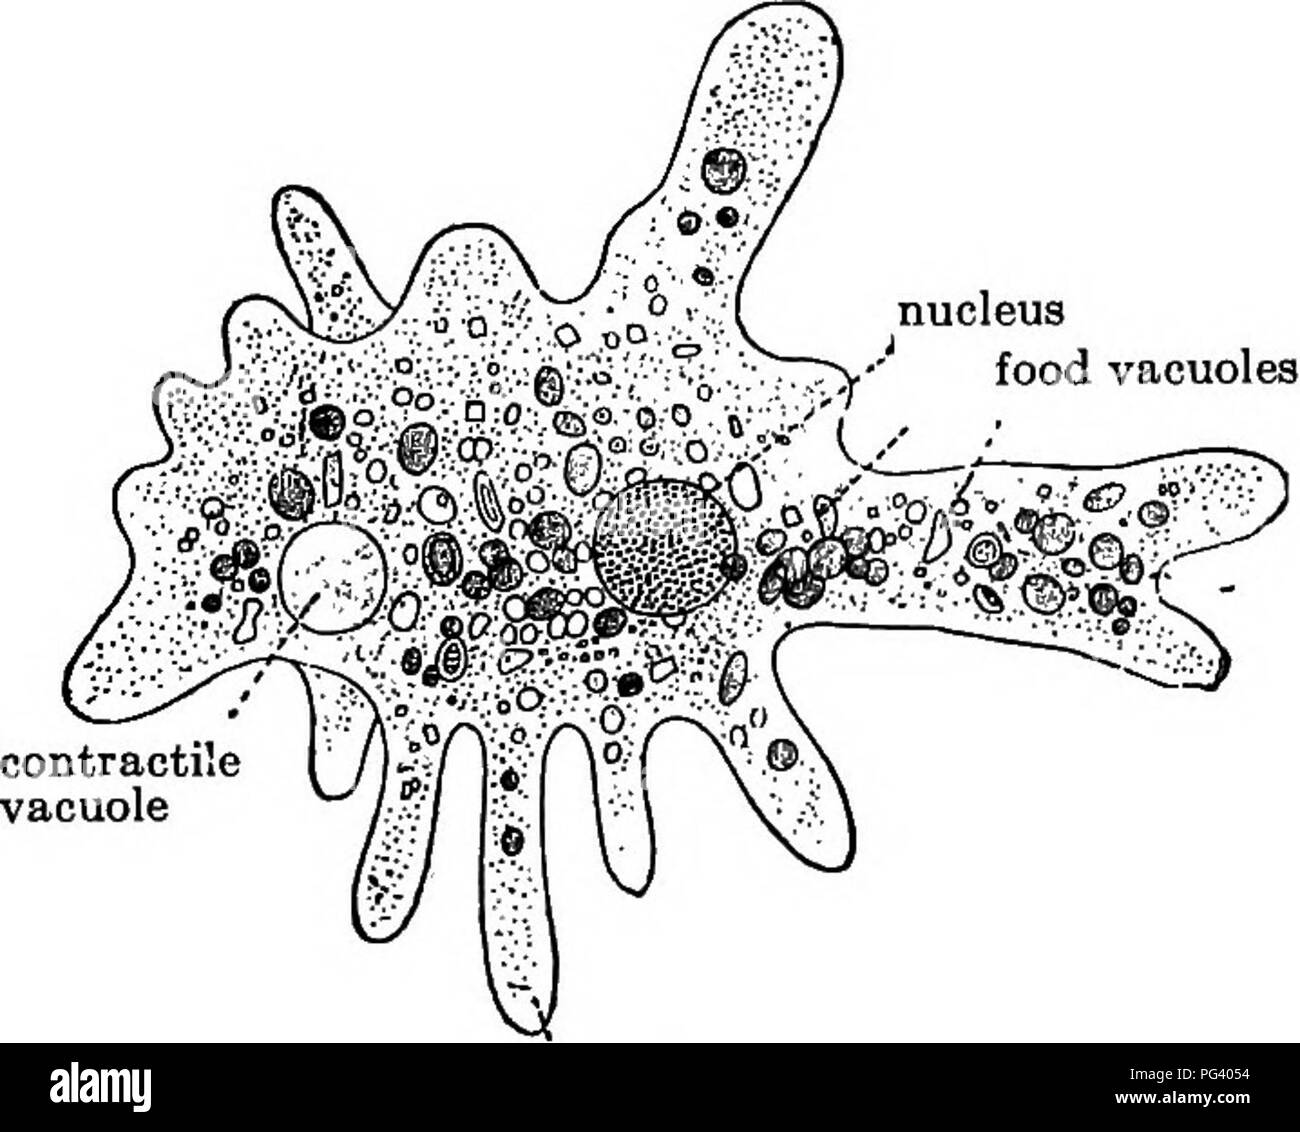 . Elementary biology, animal and human. Biology. PARAMECIUM AND ITS BELATIVES 171 C Excretion of liquid waste. Look for a clear, roundish spot in the amoeba which at intervals disappears. This is the contractile vacuole. The liquid waste flows into this space and then the protoplasm pushes together and forces the waste out of the body. 1. Describe in your own words the. appearance and action of the contractile vacuole. 2. Sketch the contractile vacuole in your drawing of the amoeba ' and label. 126. A comparison of Paramecium and amceba. — Both amoeba and Paramecium are animals so small that t Stock Photo